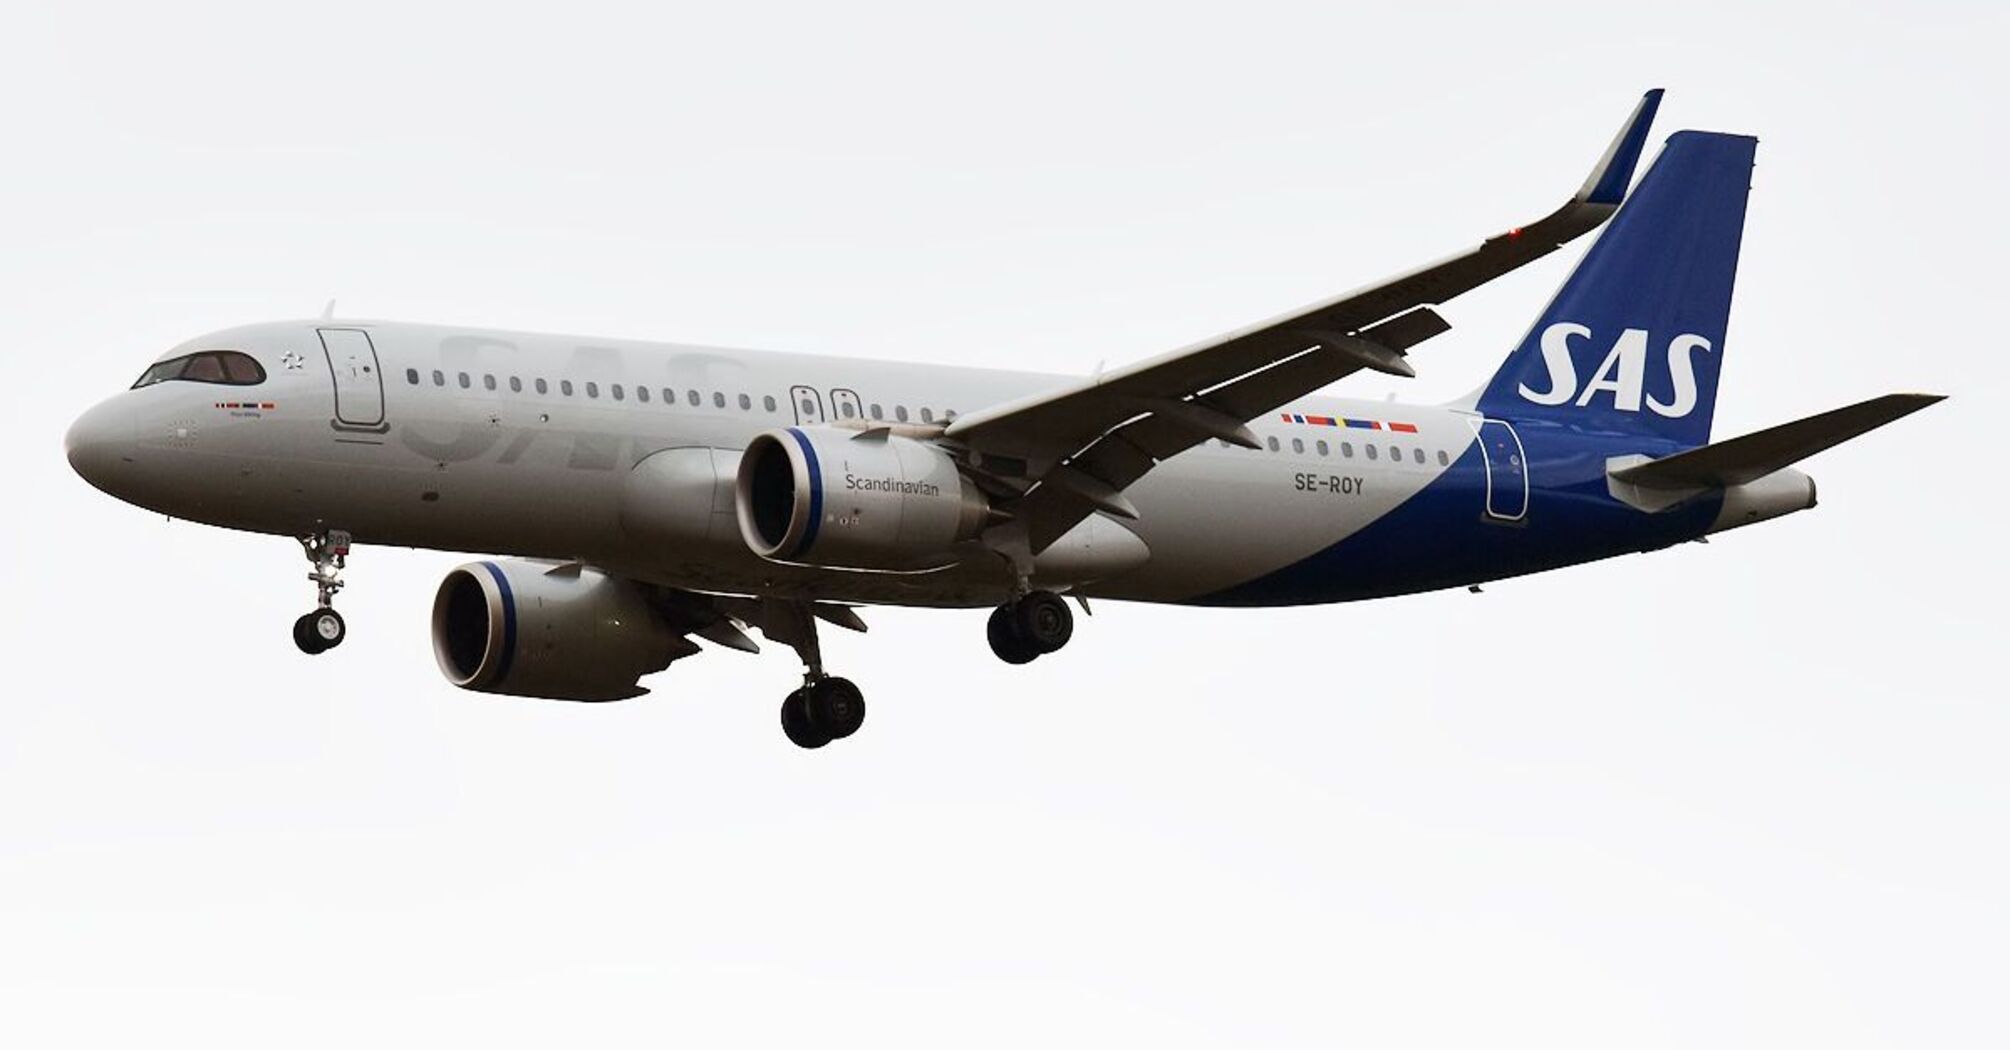 Sas Scandinavian Airlines Compensation for Delayed or Cancelled Flights